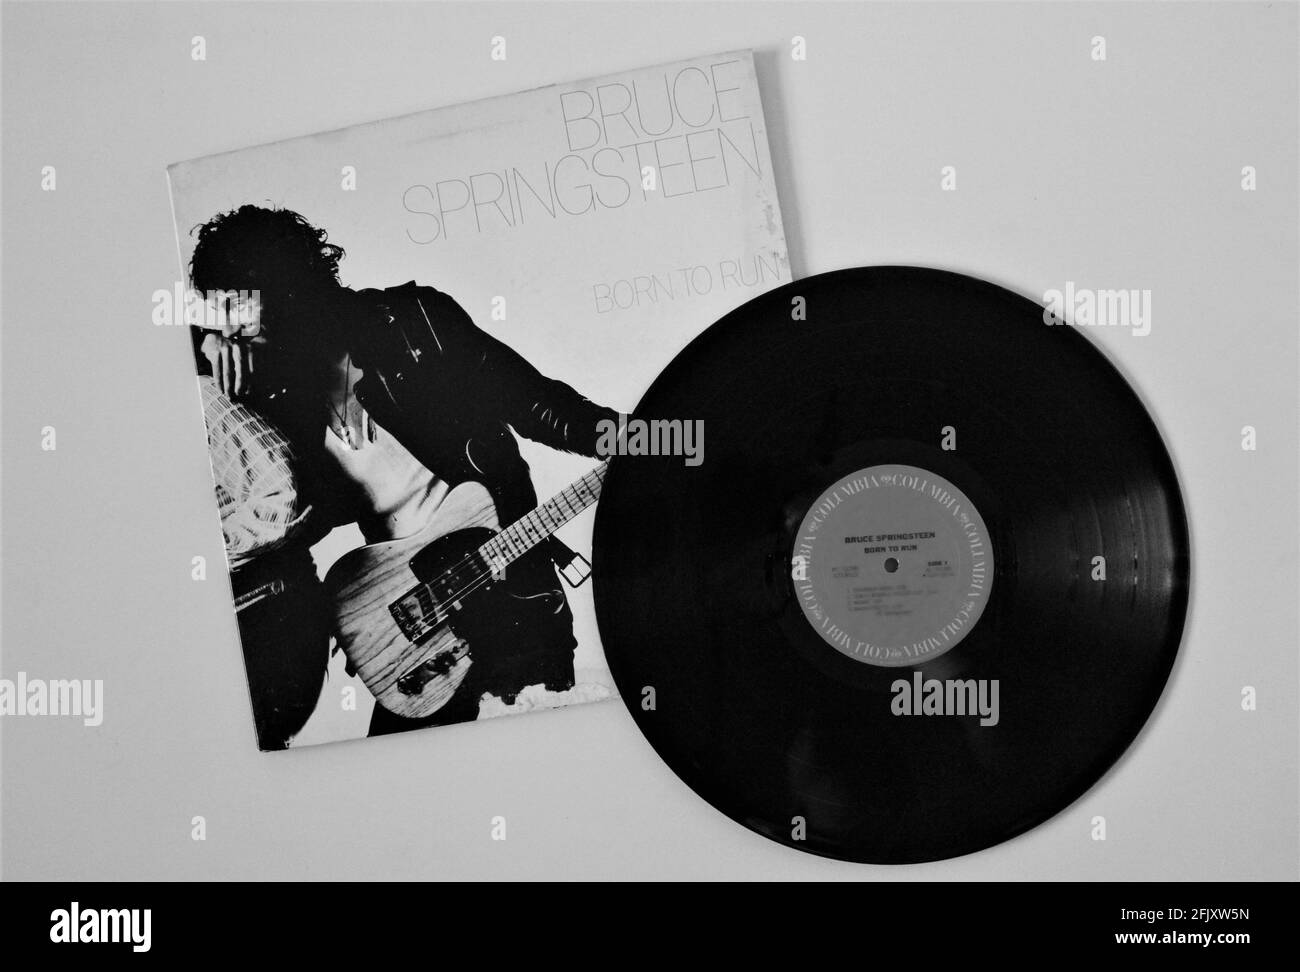 Pop and rock and roll singer, Bruce Springsteen, music album on vinyl  record LP disc. Titled Born To Run. Colombia label Stock Photo - Alamy